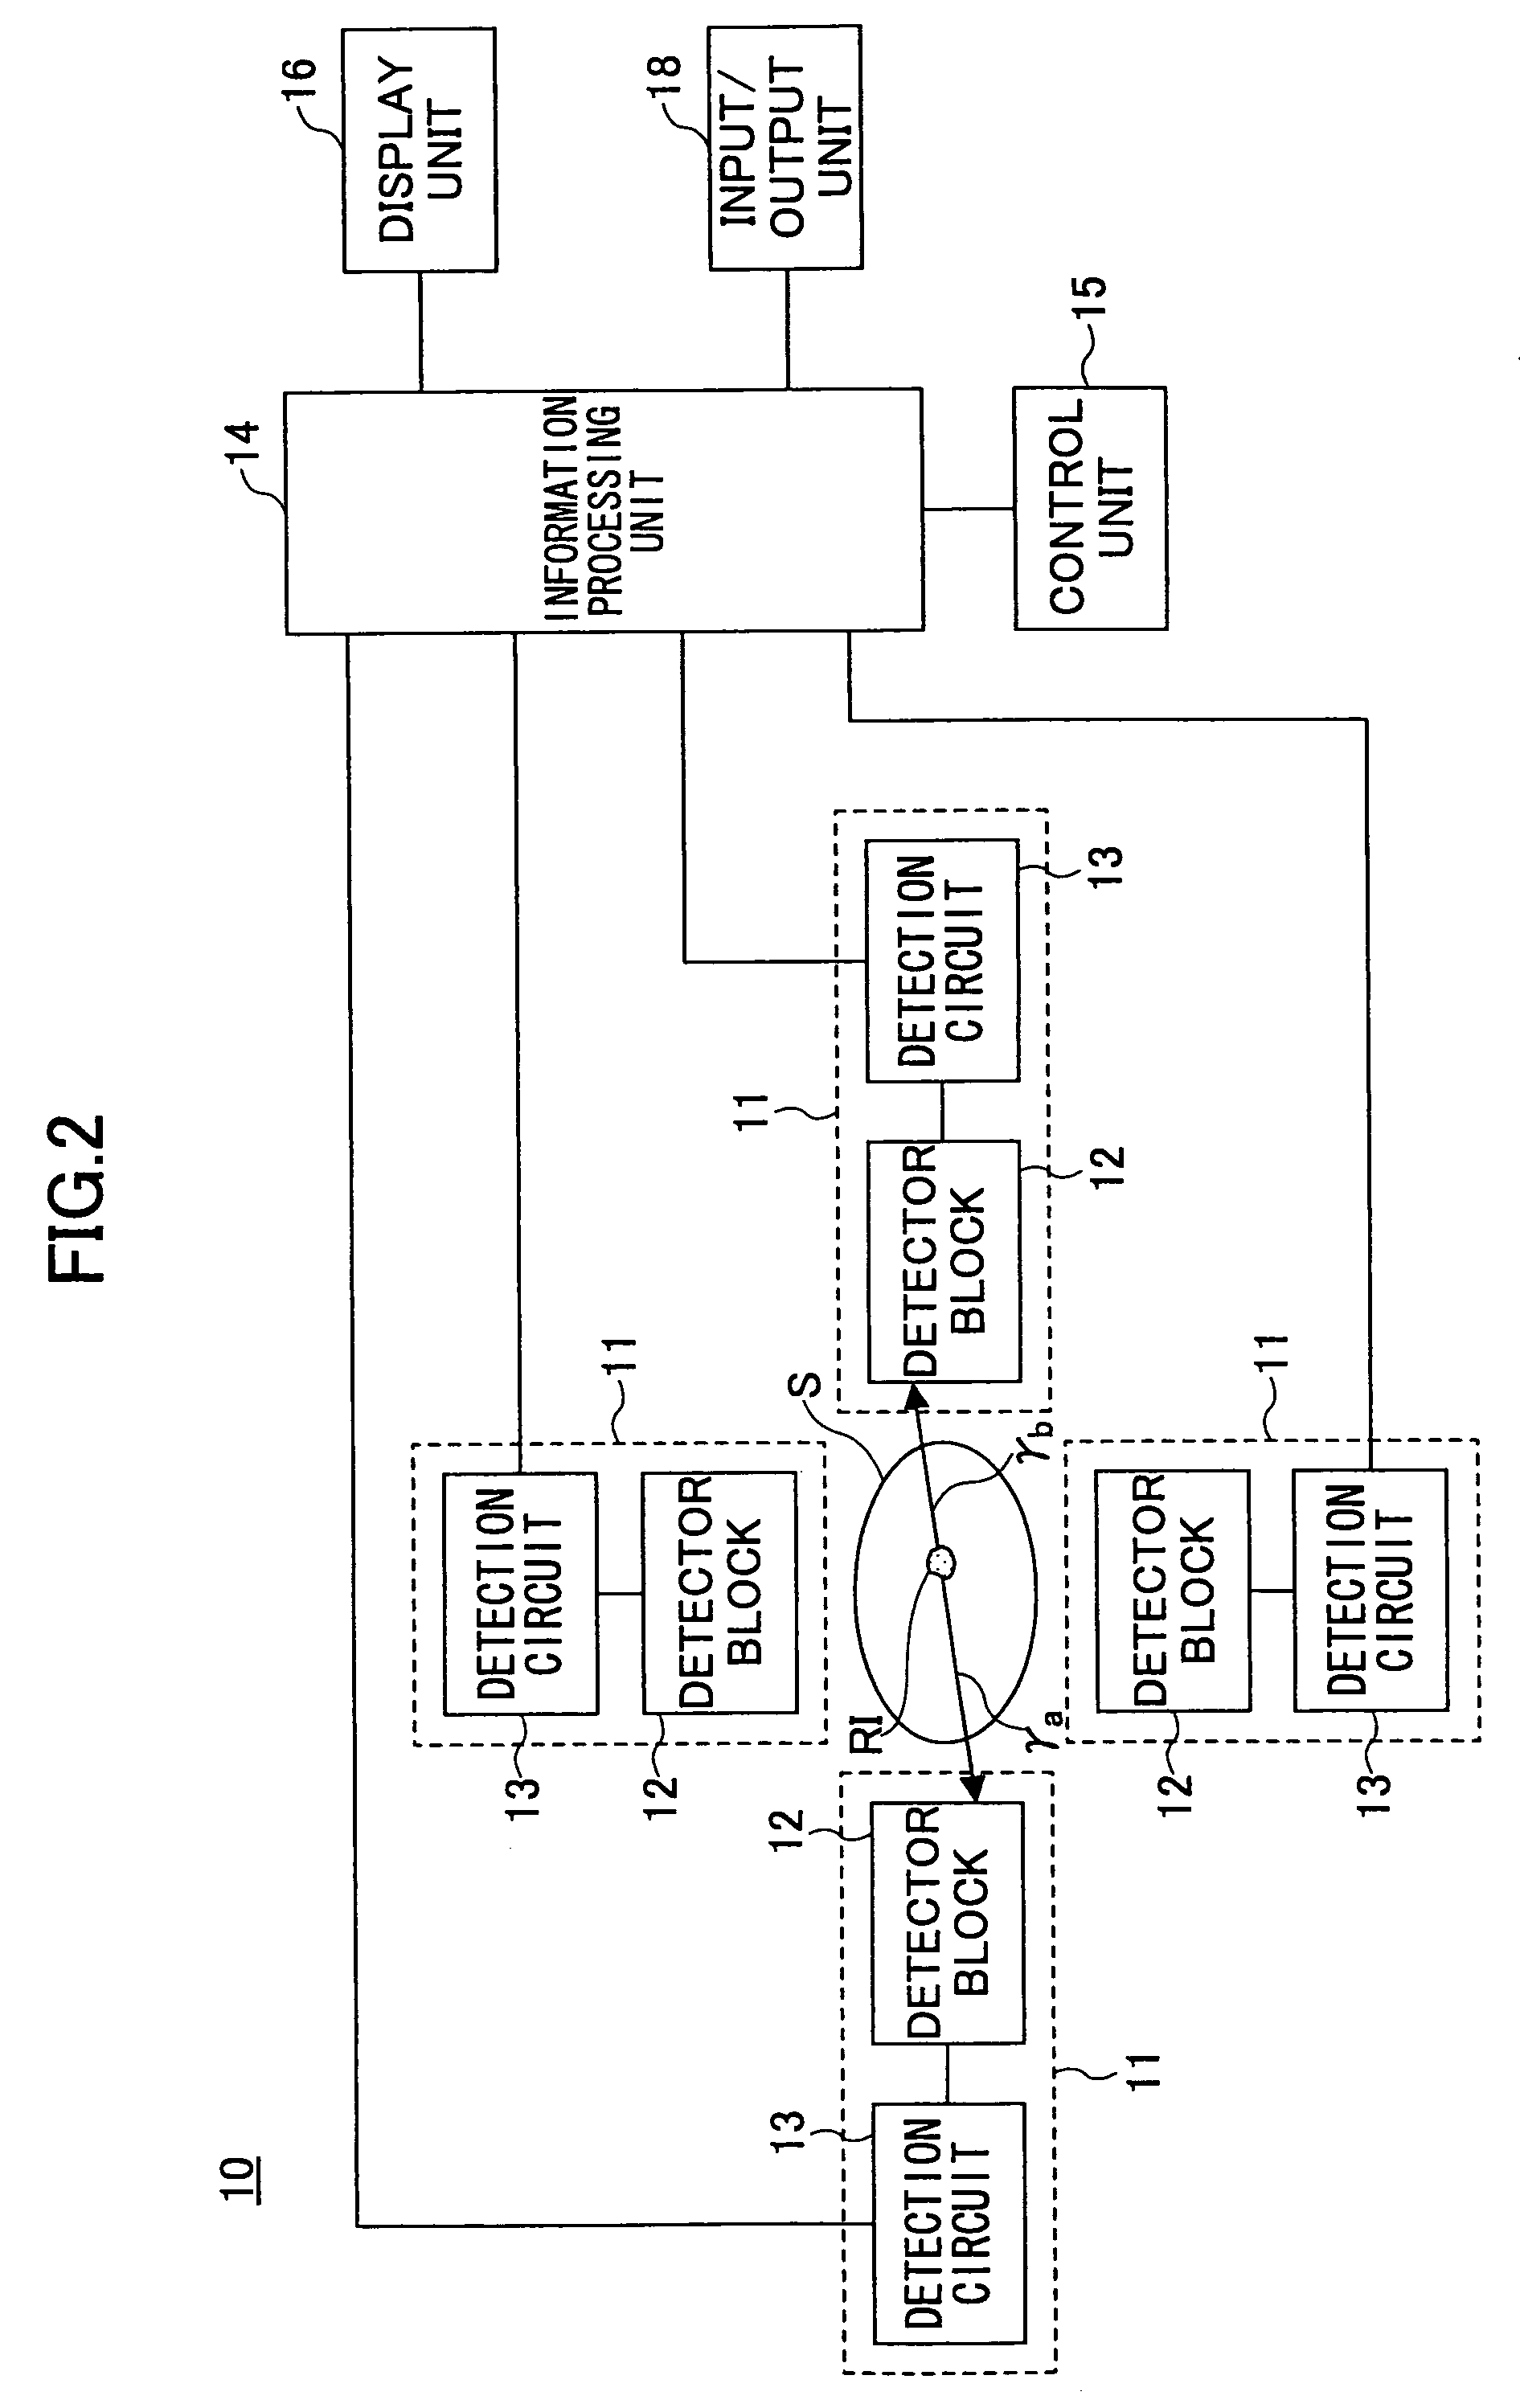 Radiation detection circuit and apparatus for radiographic examination